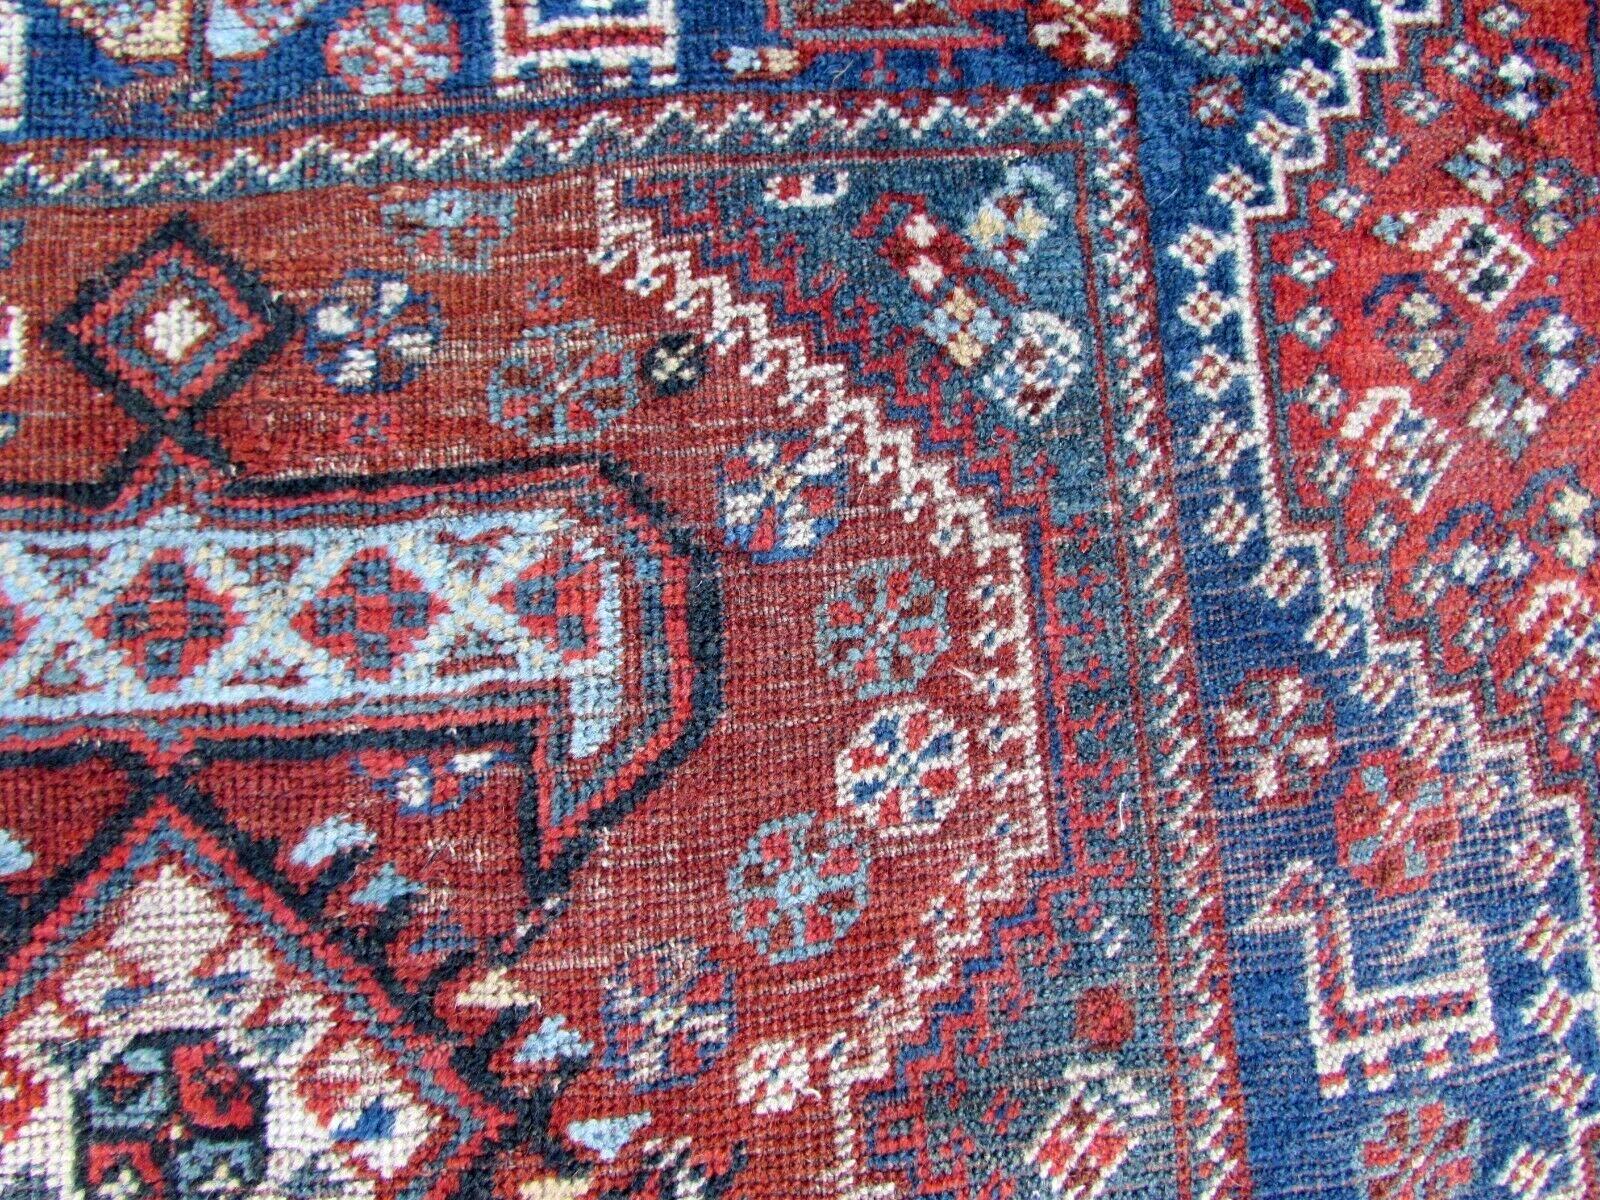 Early 20th Century Handmade Vintage Persian Style Shiraz Rug 3.8' x 4.9', 1920s, 1Q34 For Sale